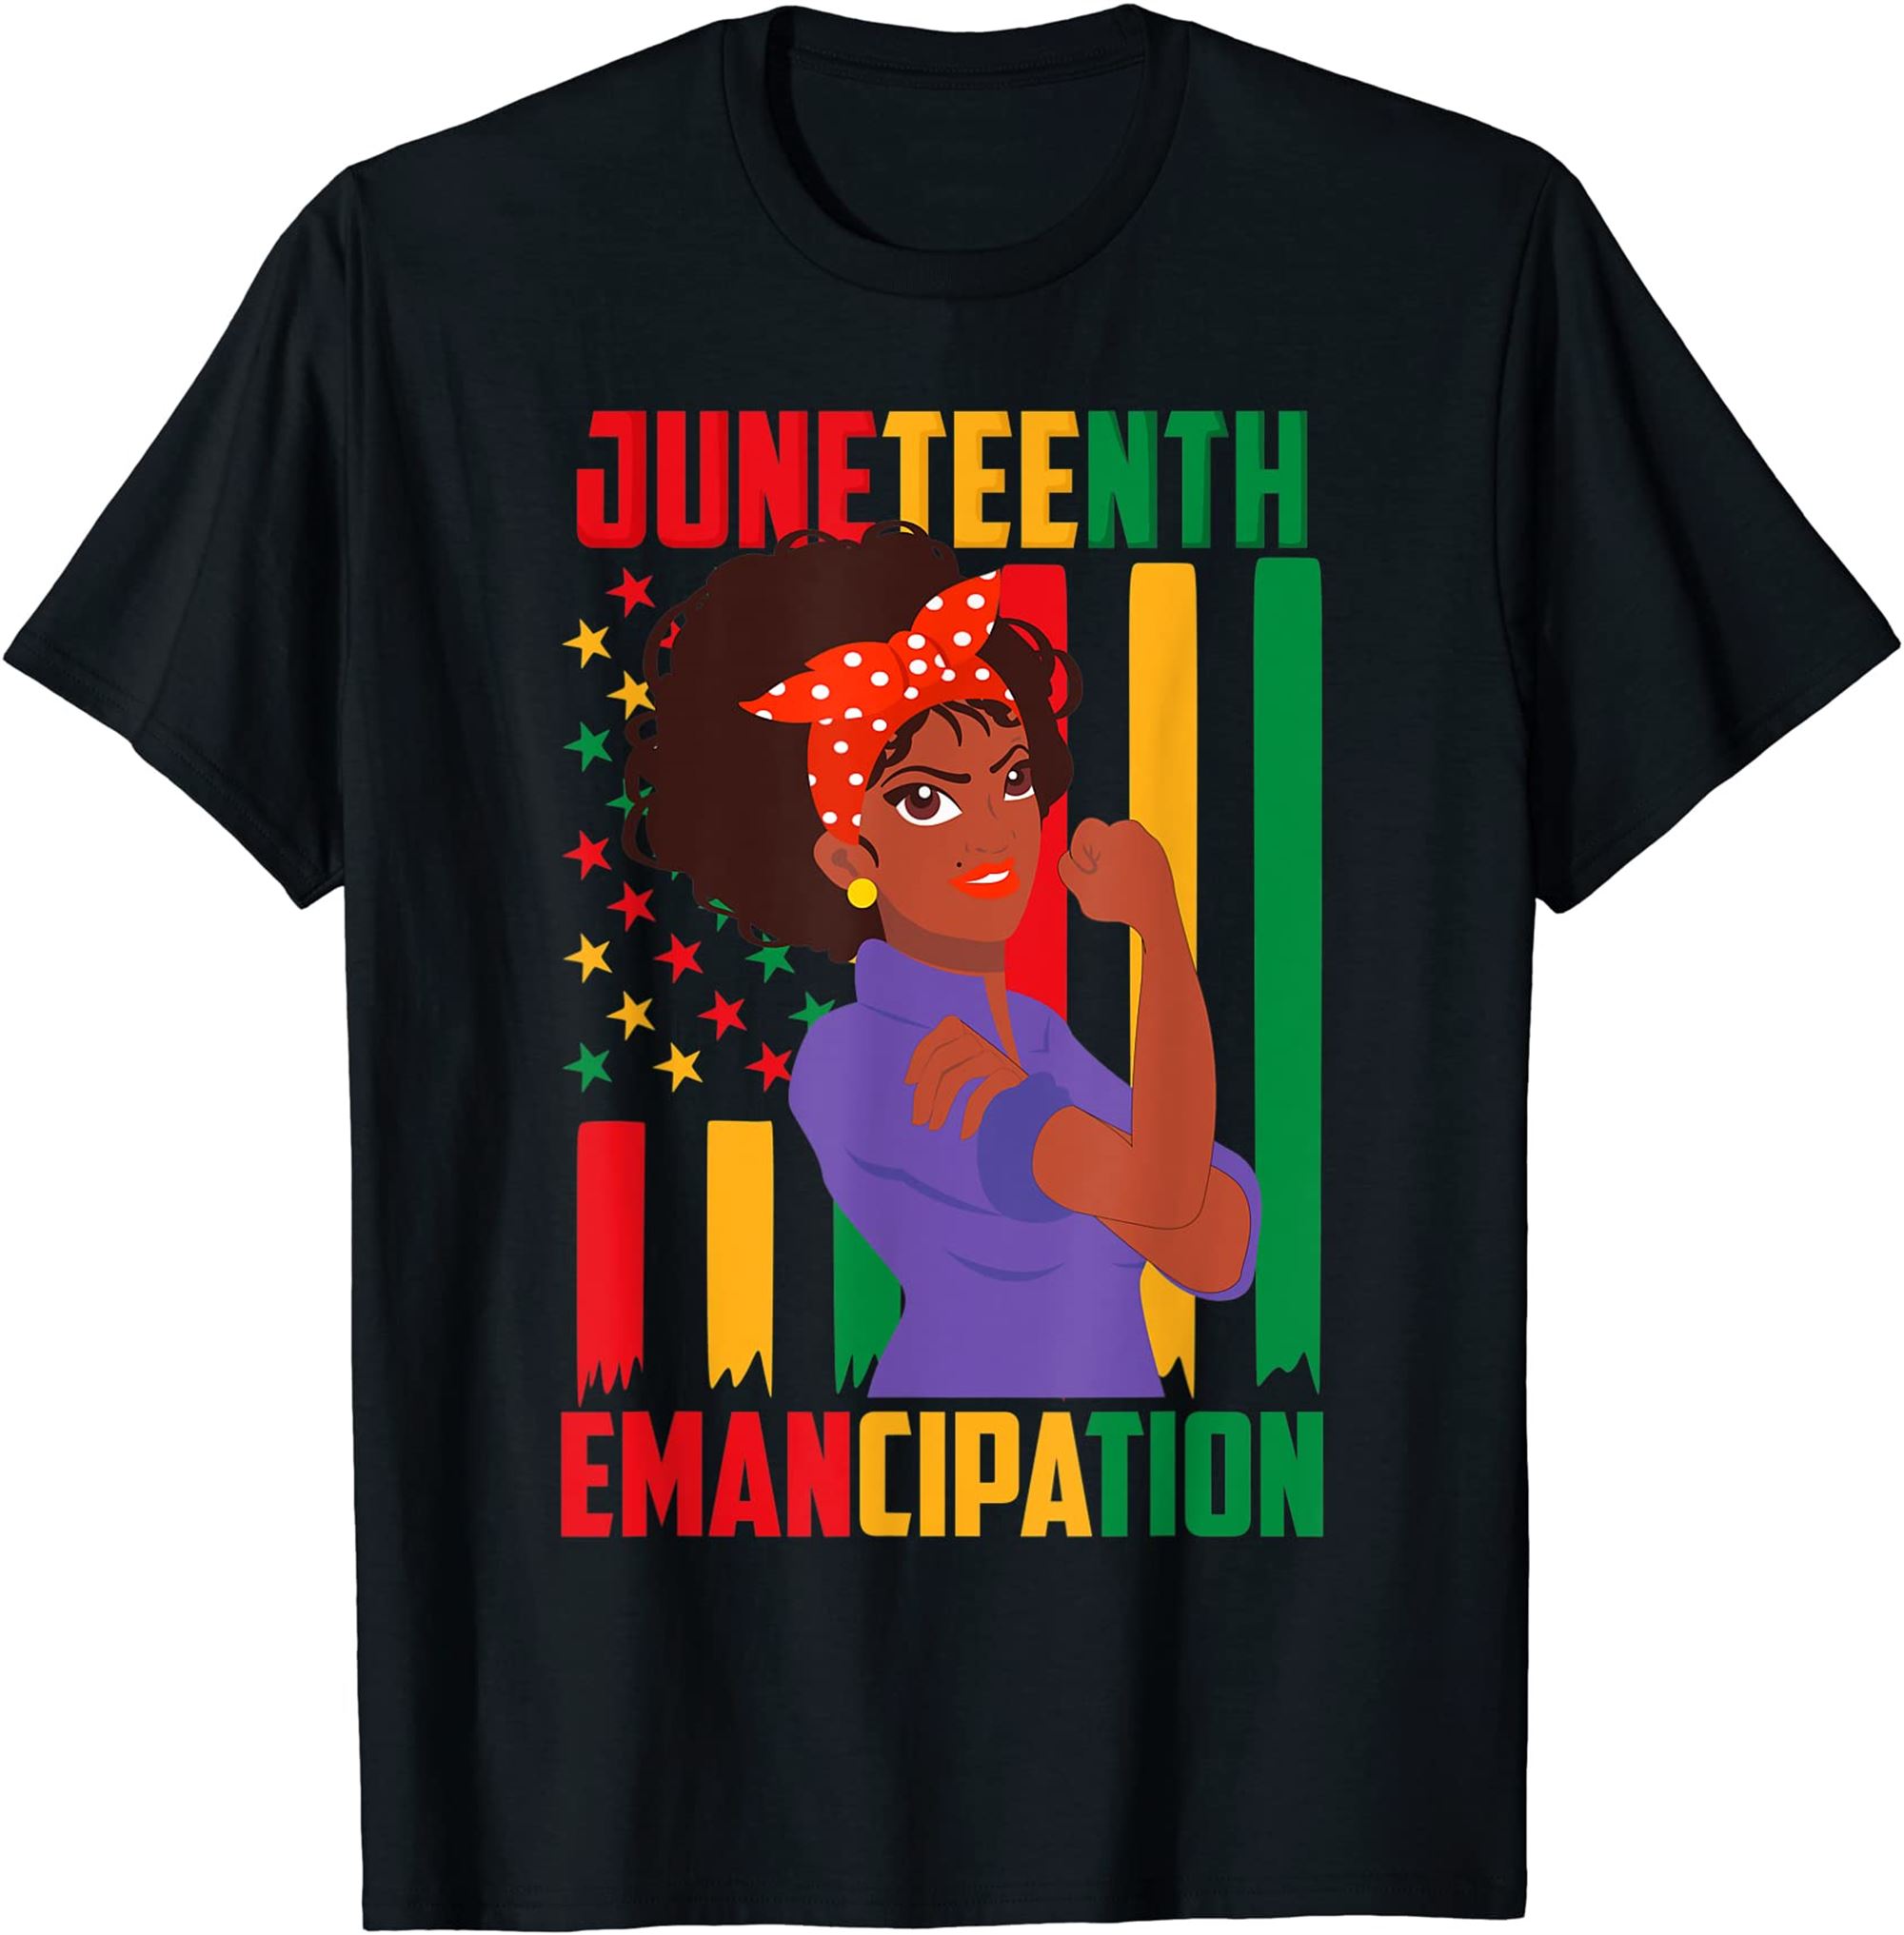 Juneteenth Emancipation Day Black American Juneteenth Flag T-shirt Plus Size Up To 5xl